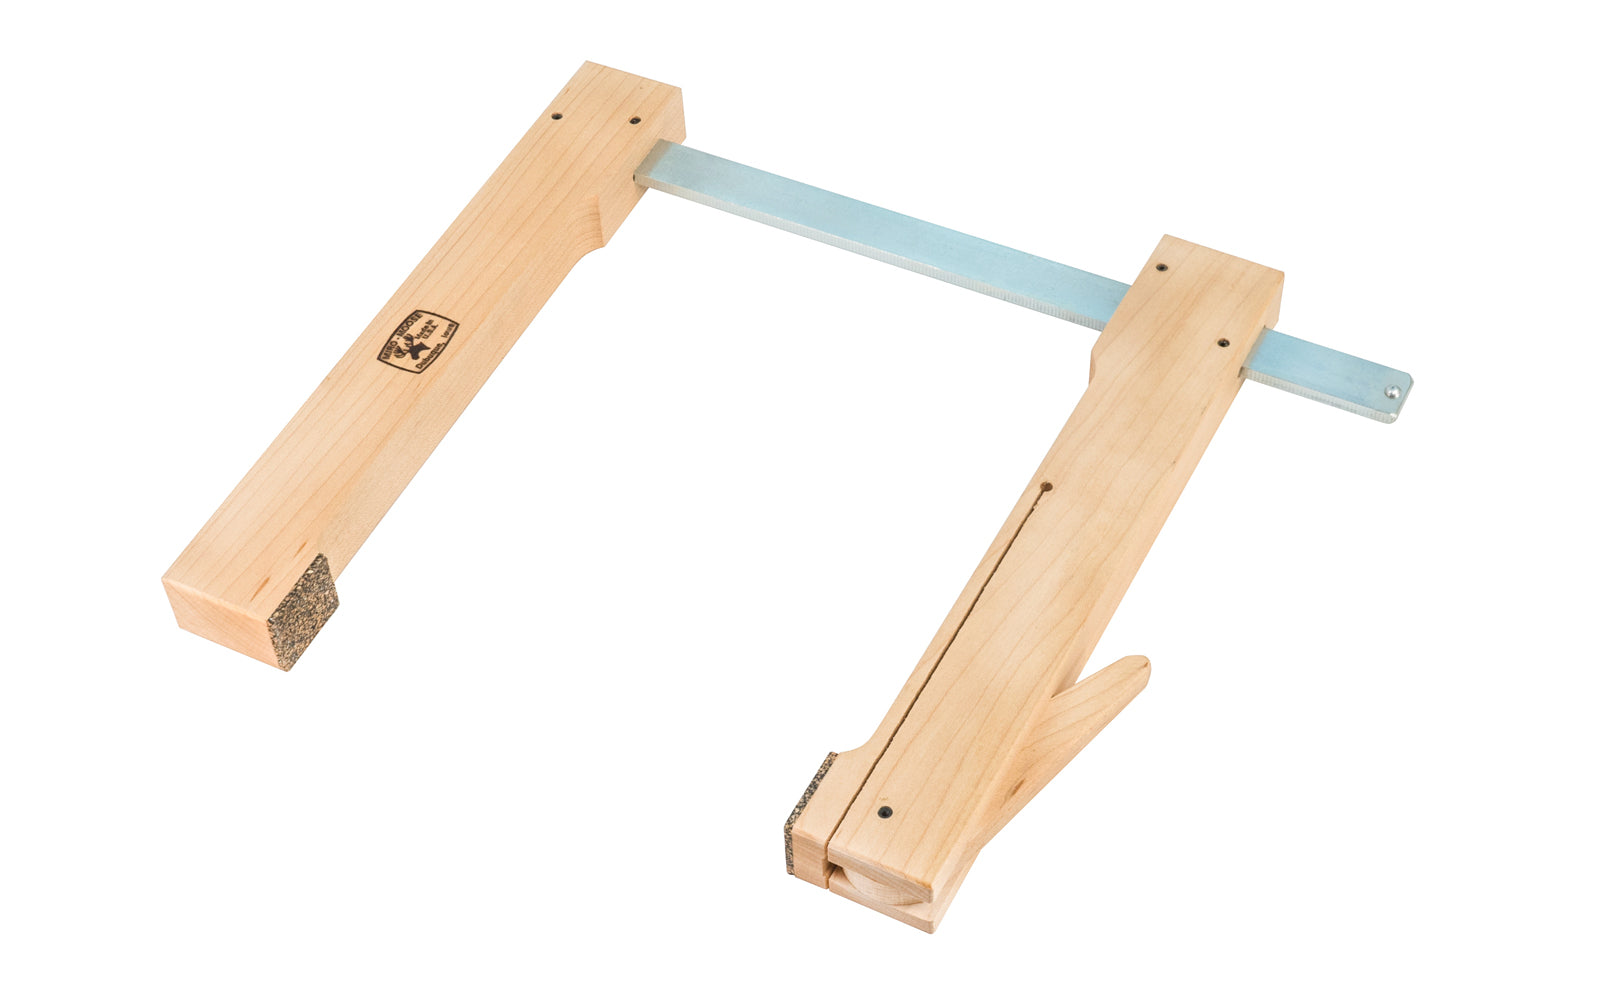 This "Miro-Moose" Maple cam clamp by Dubuque Clamp Works is a lightweight wooden cam clamp with a 8" opening capacity & 8-1/2" deep throat. The upper jaw slides into position, & the offset cam lever delicately locks the work piece in place giving strong pressure. The clamp has cork pads. Made in USA. Model 00017 ~ 099687000175